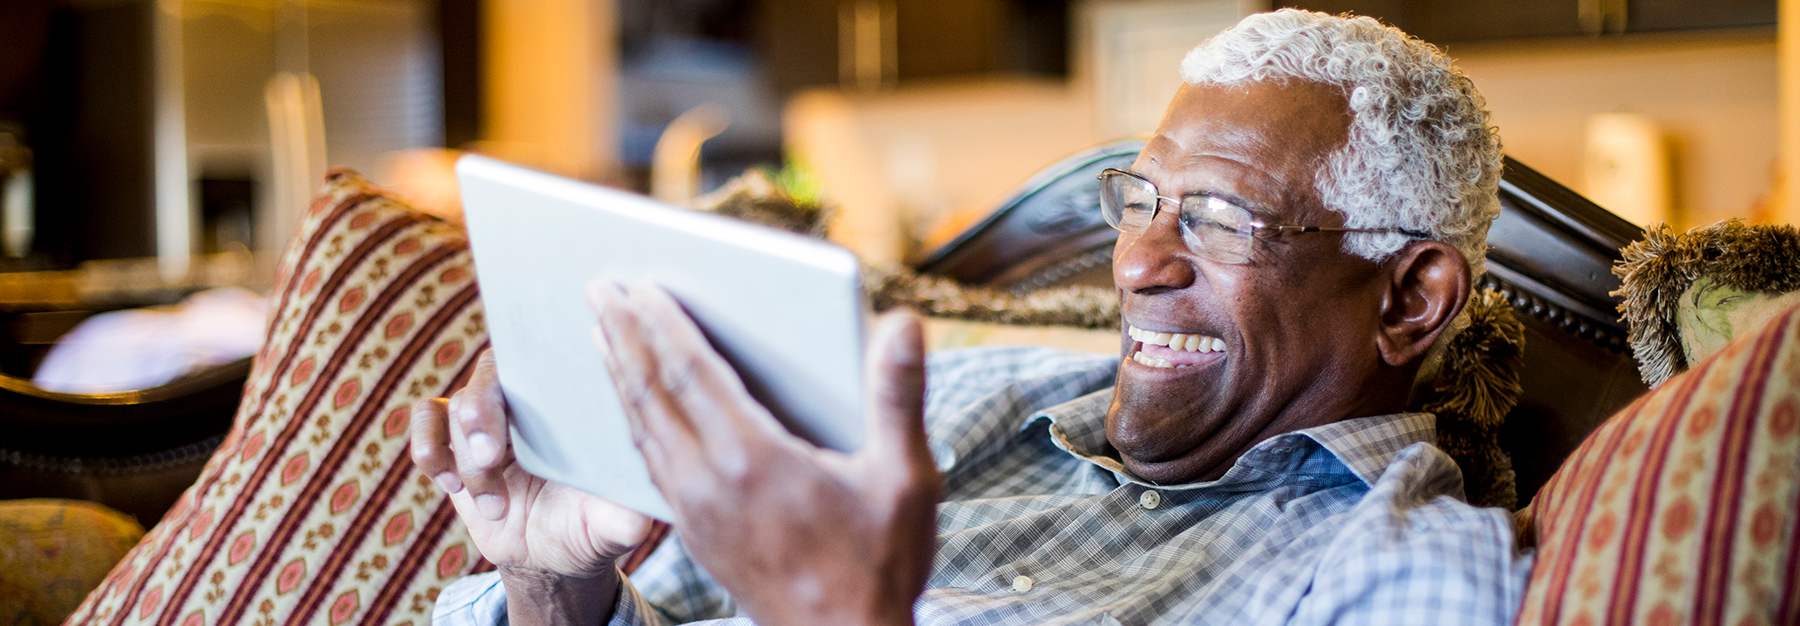 An older man enjoys watching a video on his tablet, while sitting comfortably on the couch.